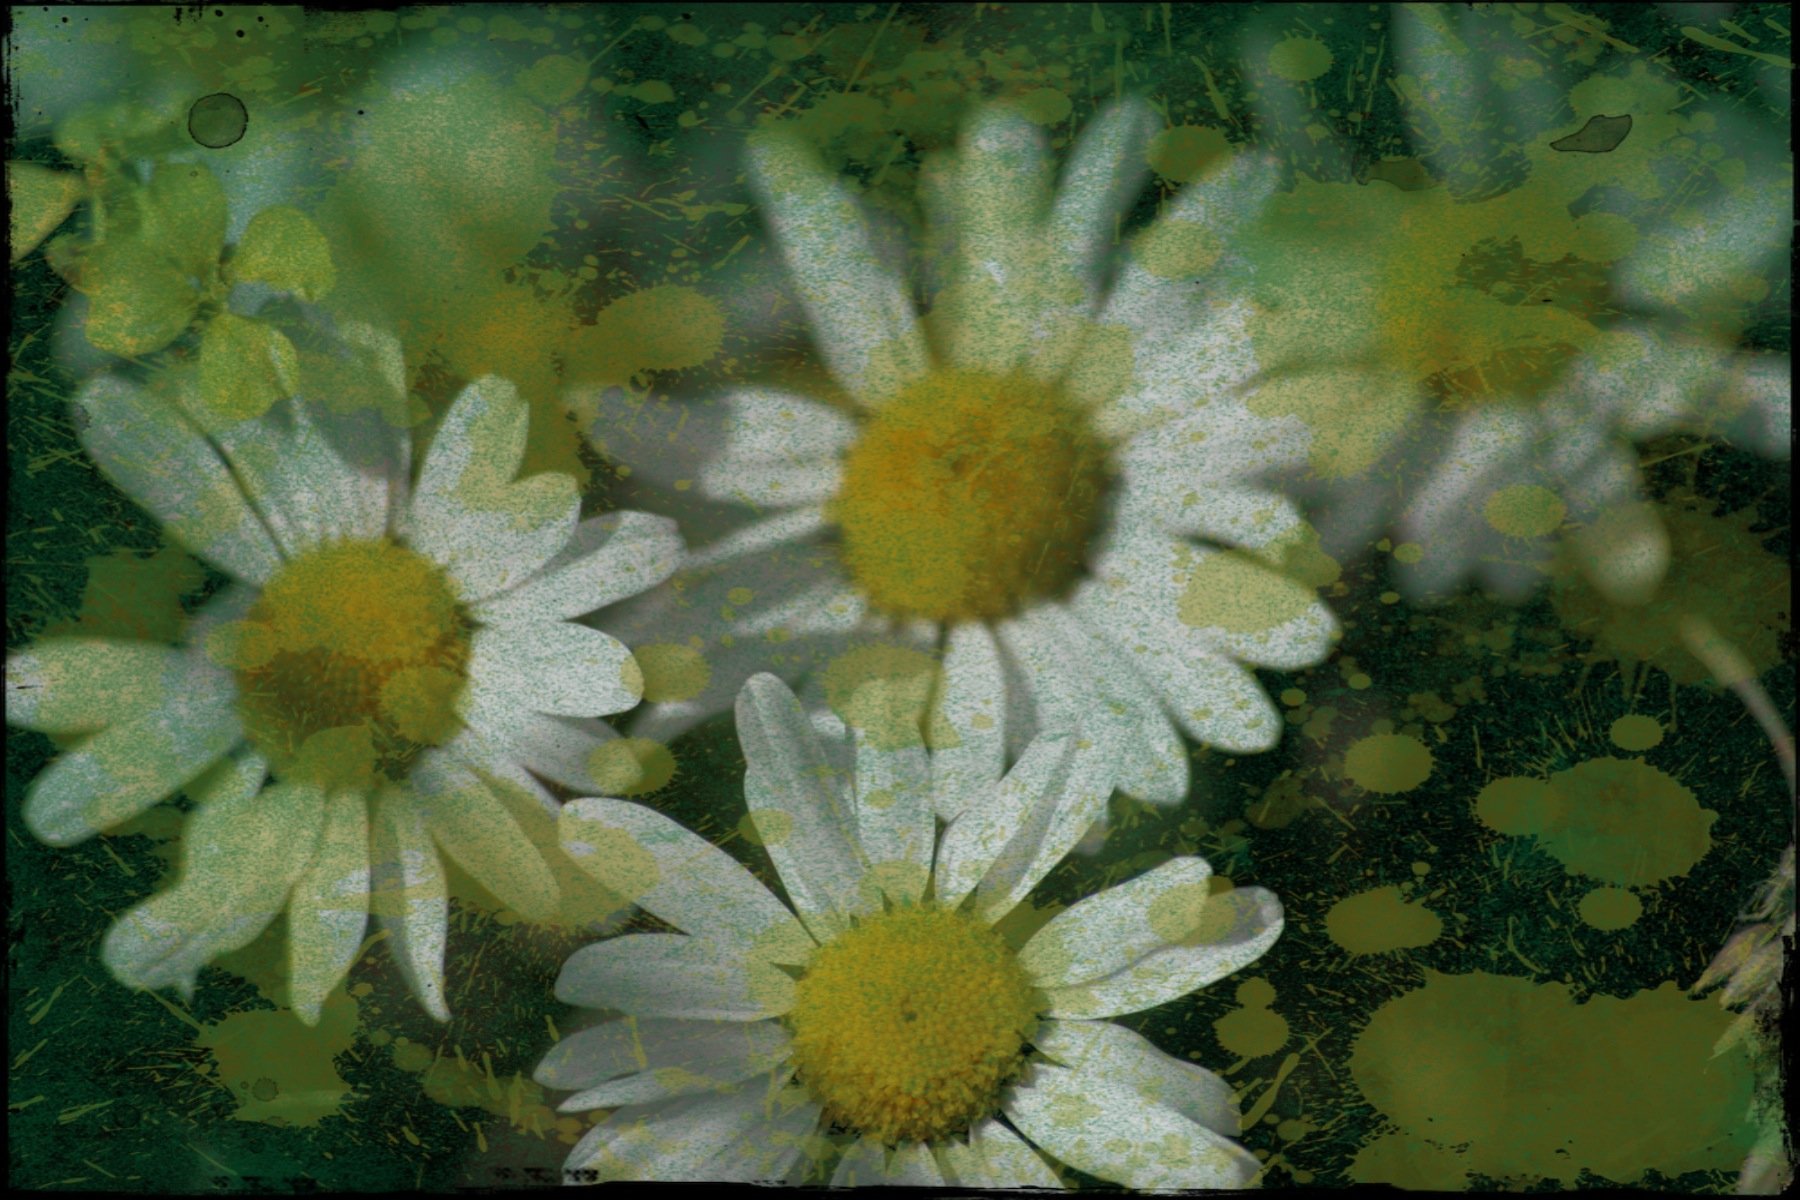 daisies are displayed in a picture with the colors